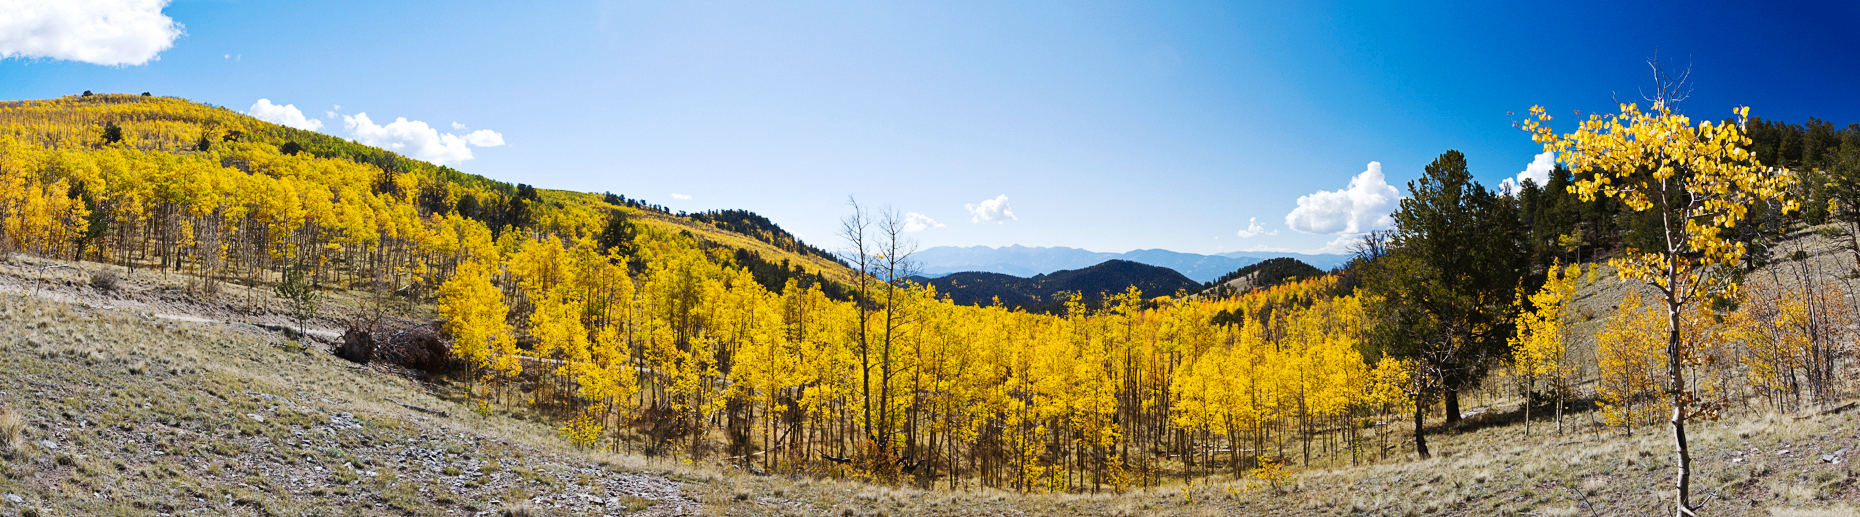 Wide panorama view of Aspen tree leaves in golden color, Aspen Ridge, CR 185, San Isabel National Forest, Colorado, USA